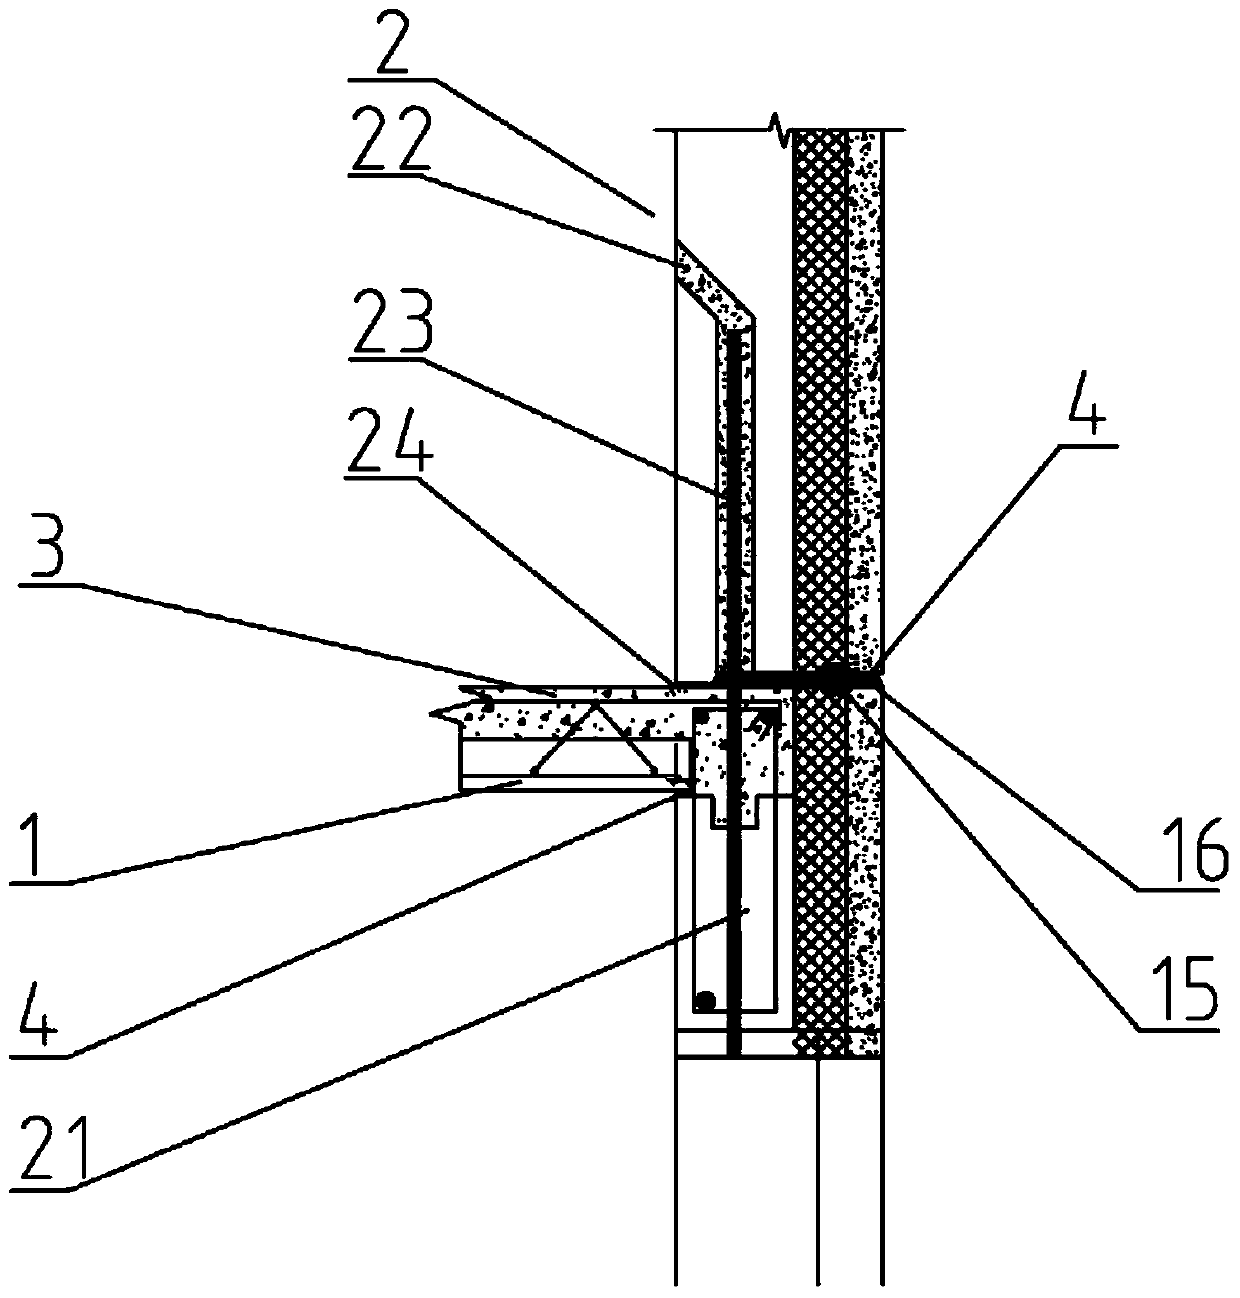 Construction method for reinforced concrete prefabricated house